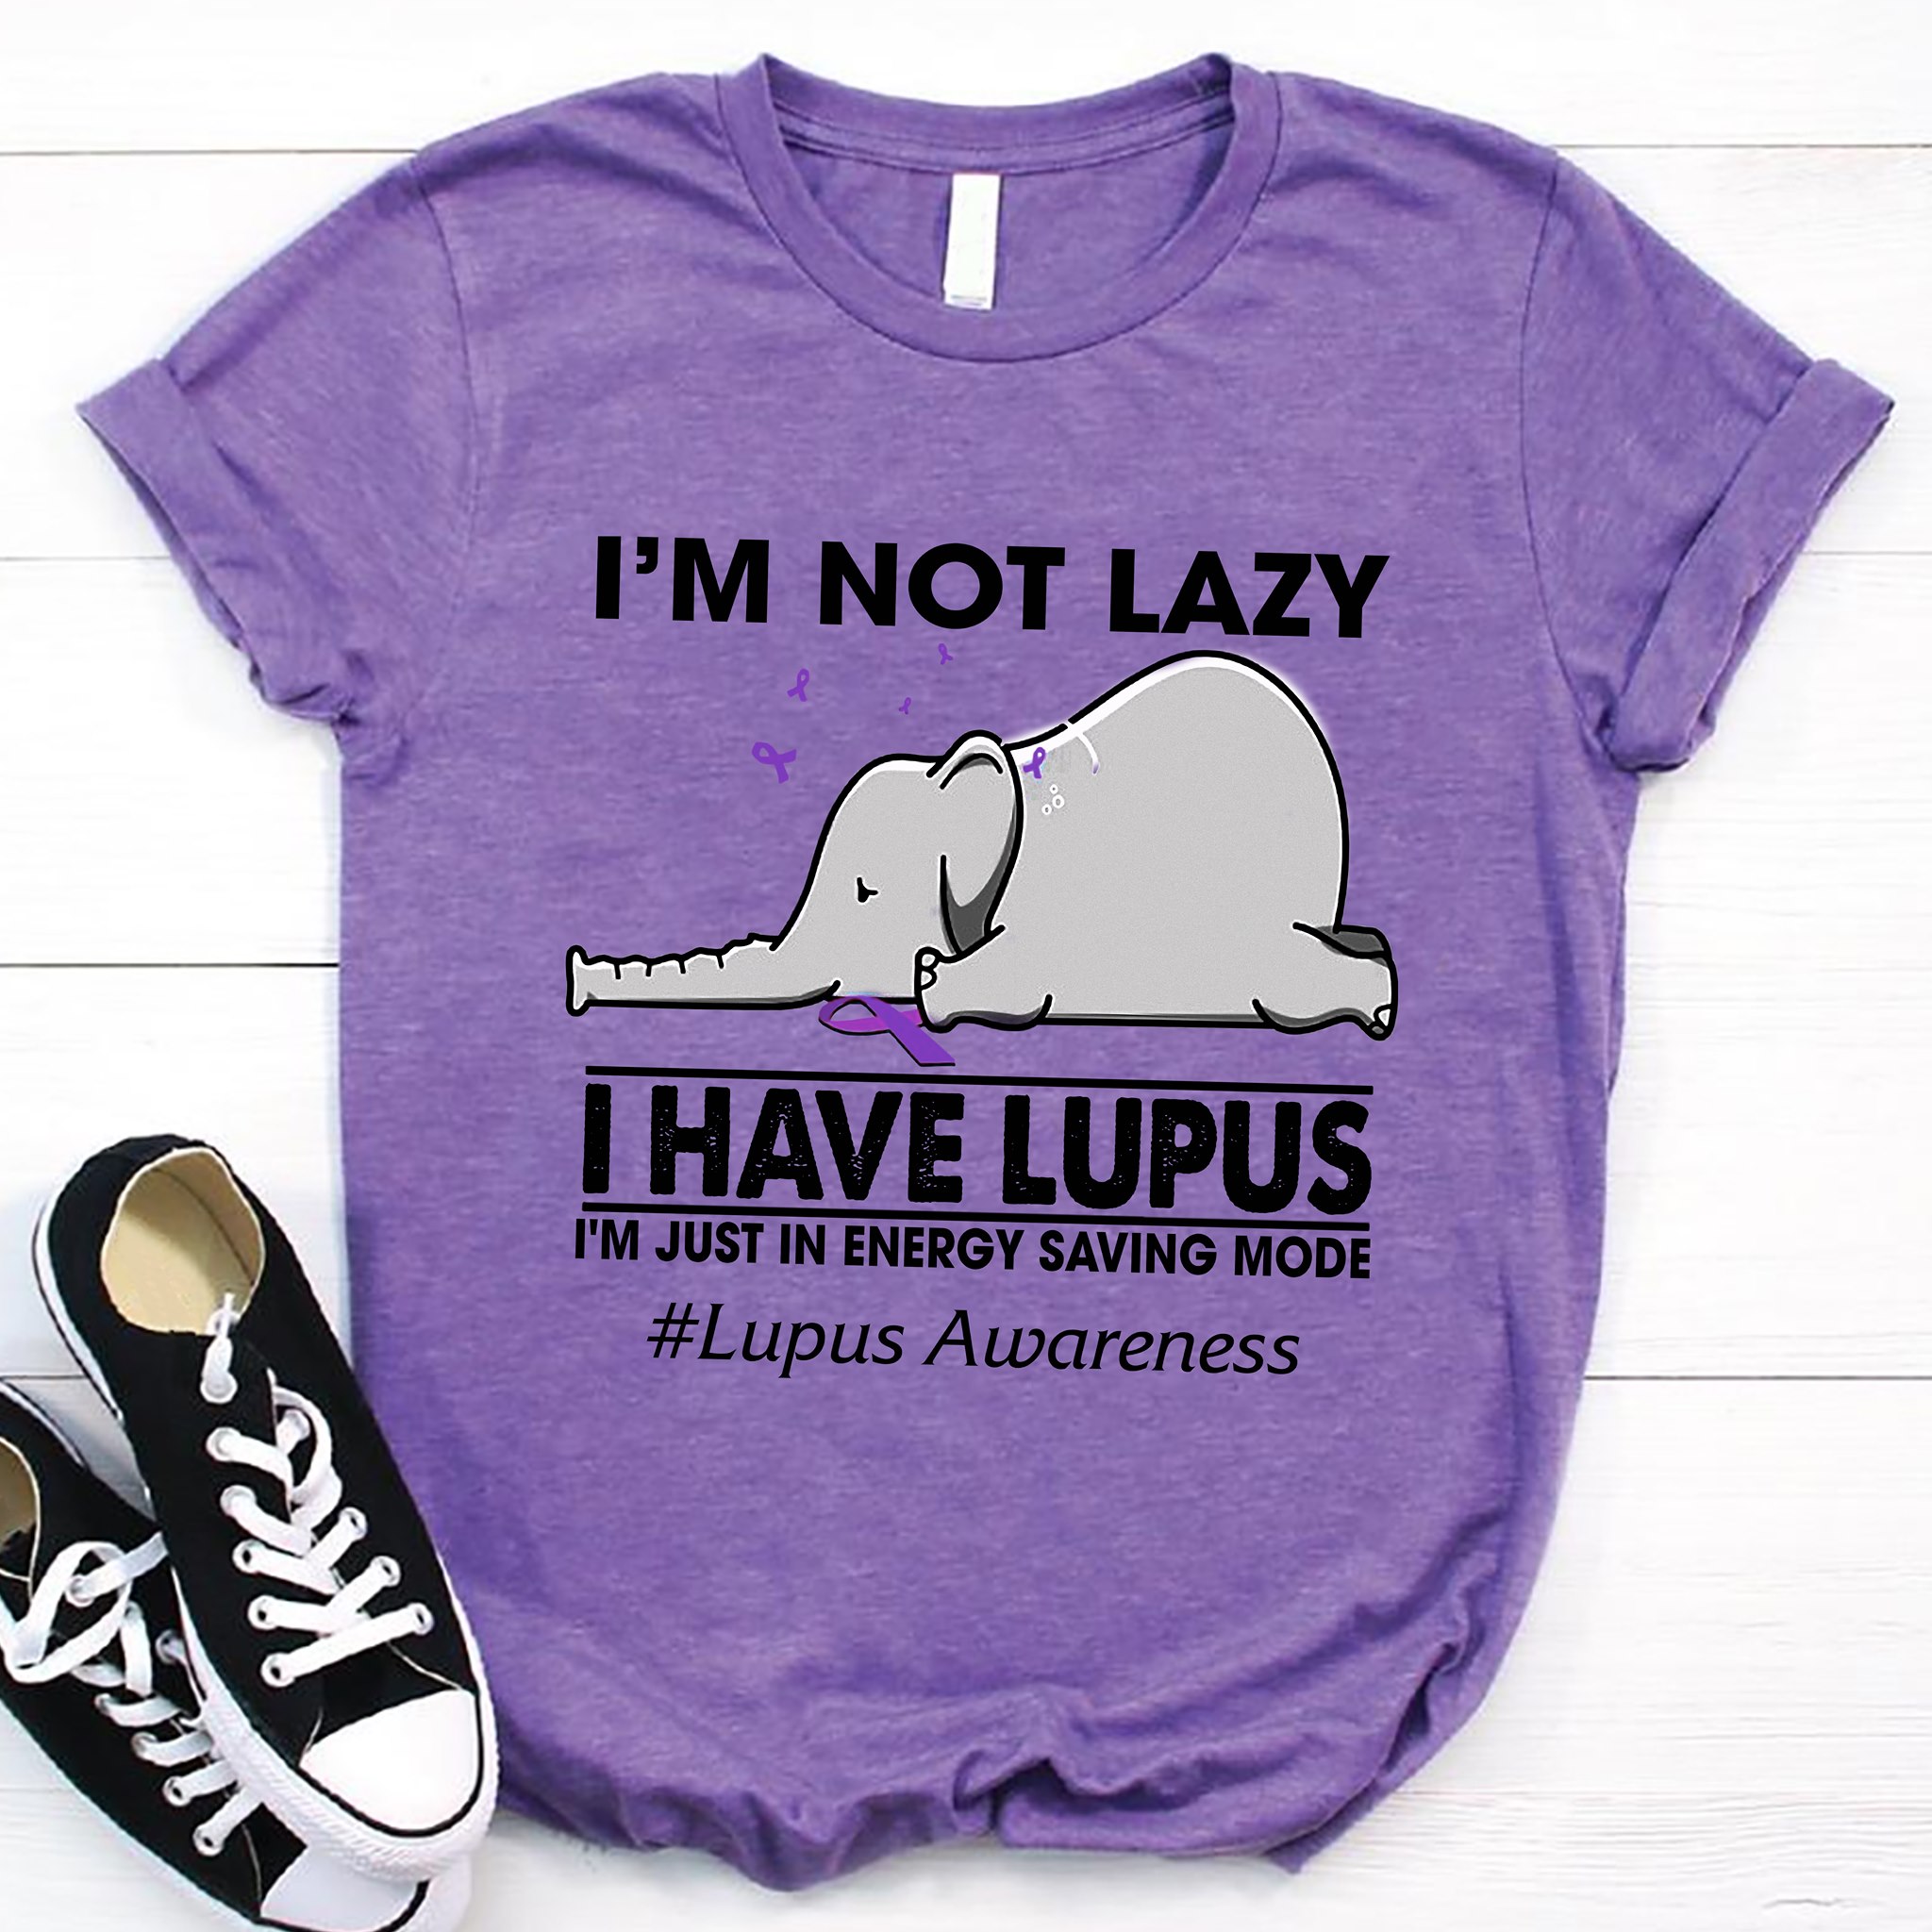 Im not lazy I have lupus. Im just in energy saving mode